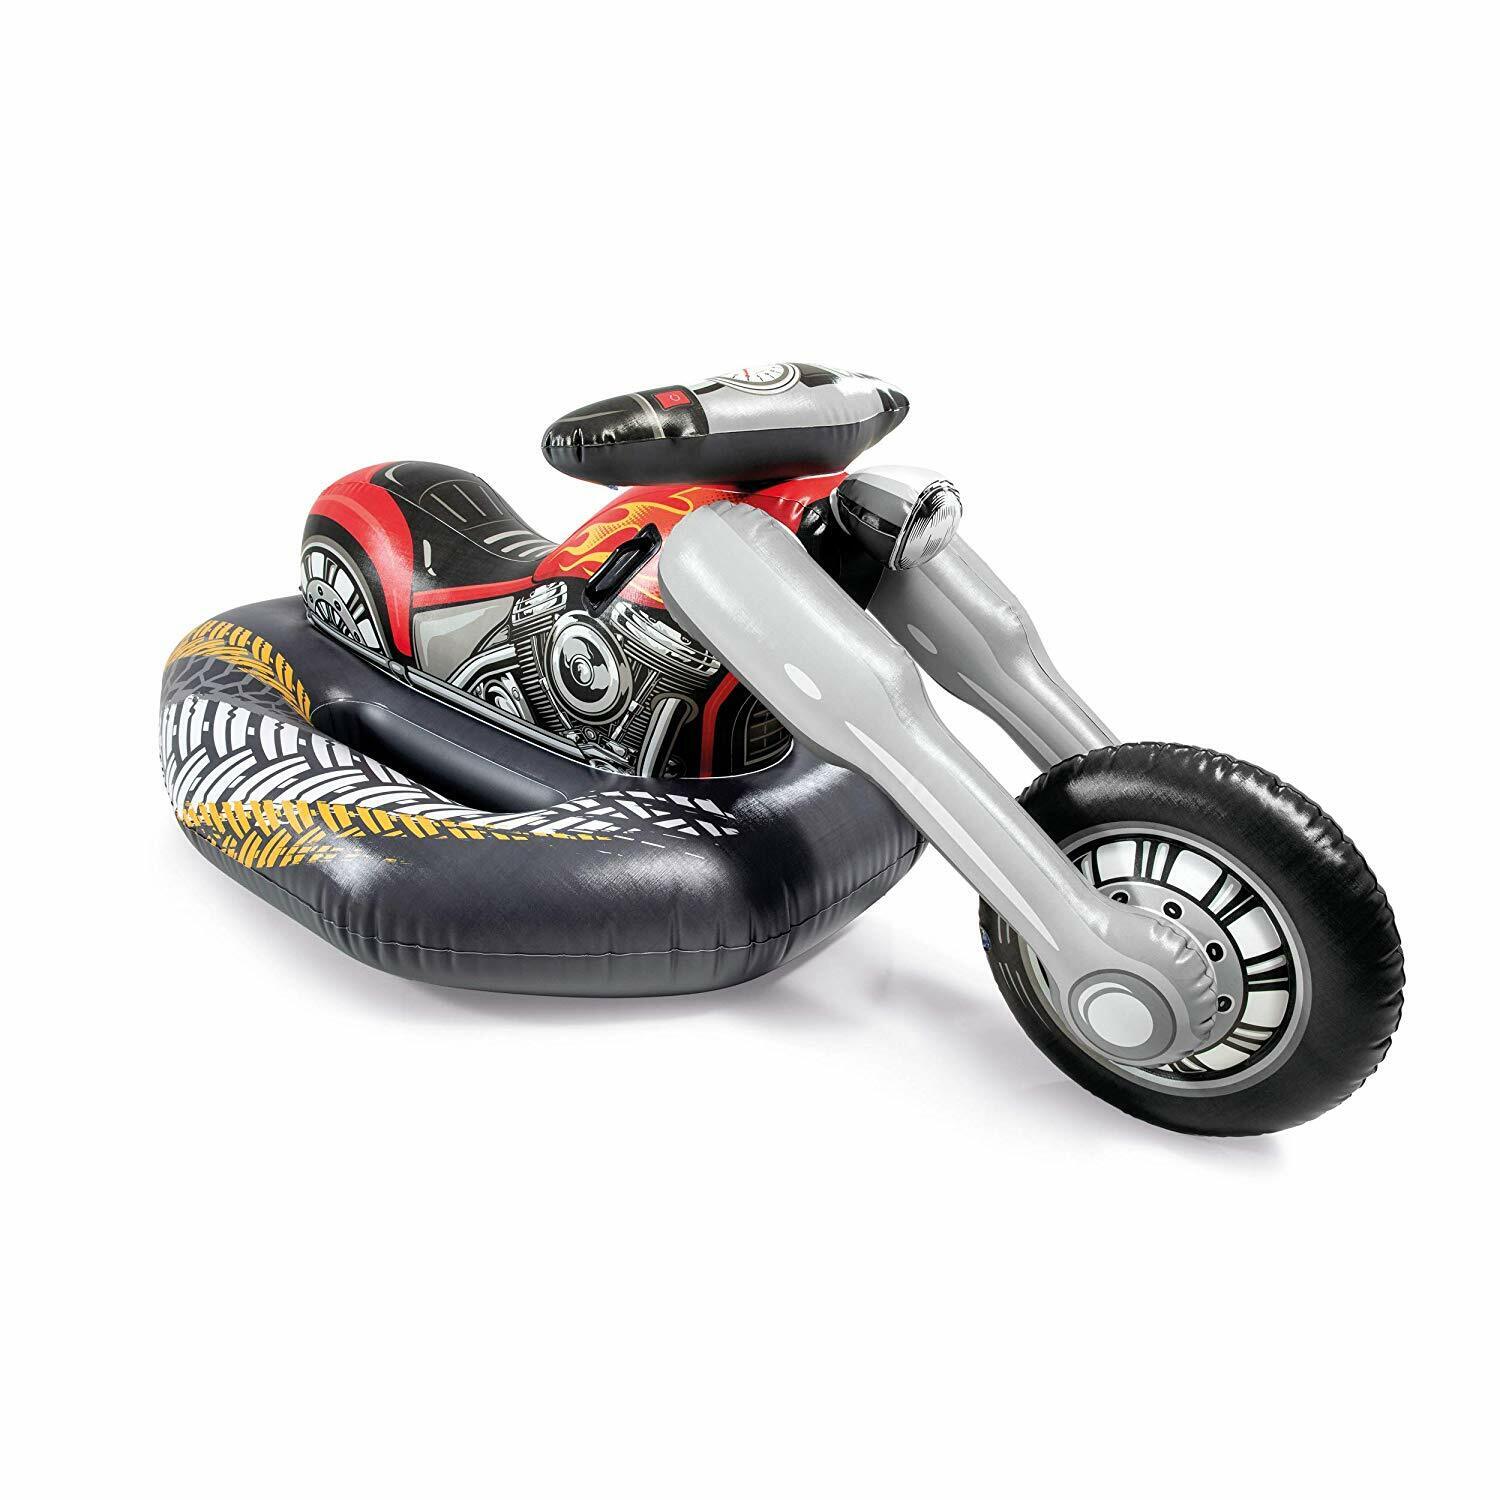 GCP Products 57534Ep Cruiser Motorcycle Inflatable Ride-On Pool Float Toy For Ages 3+